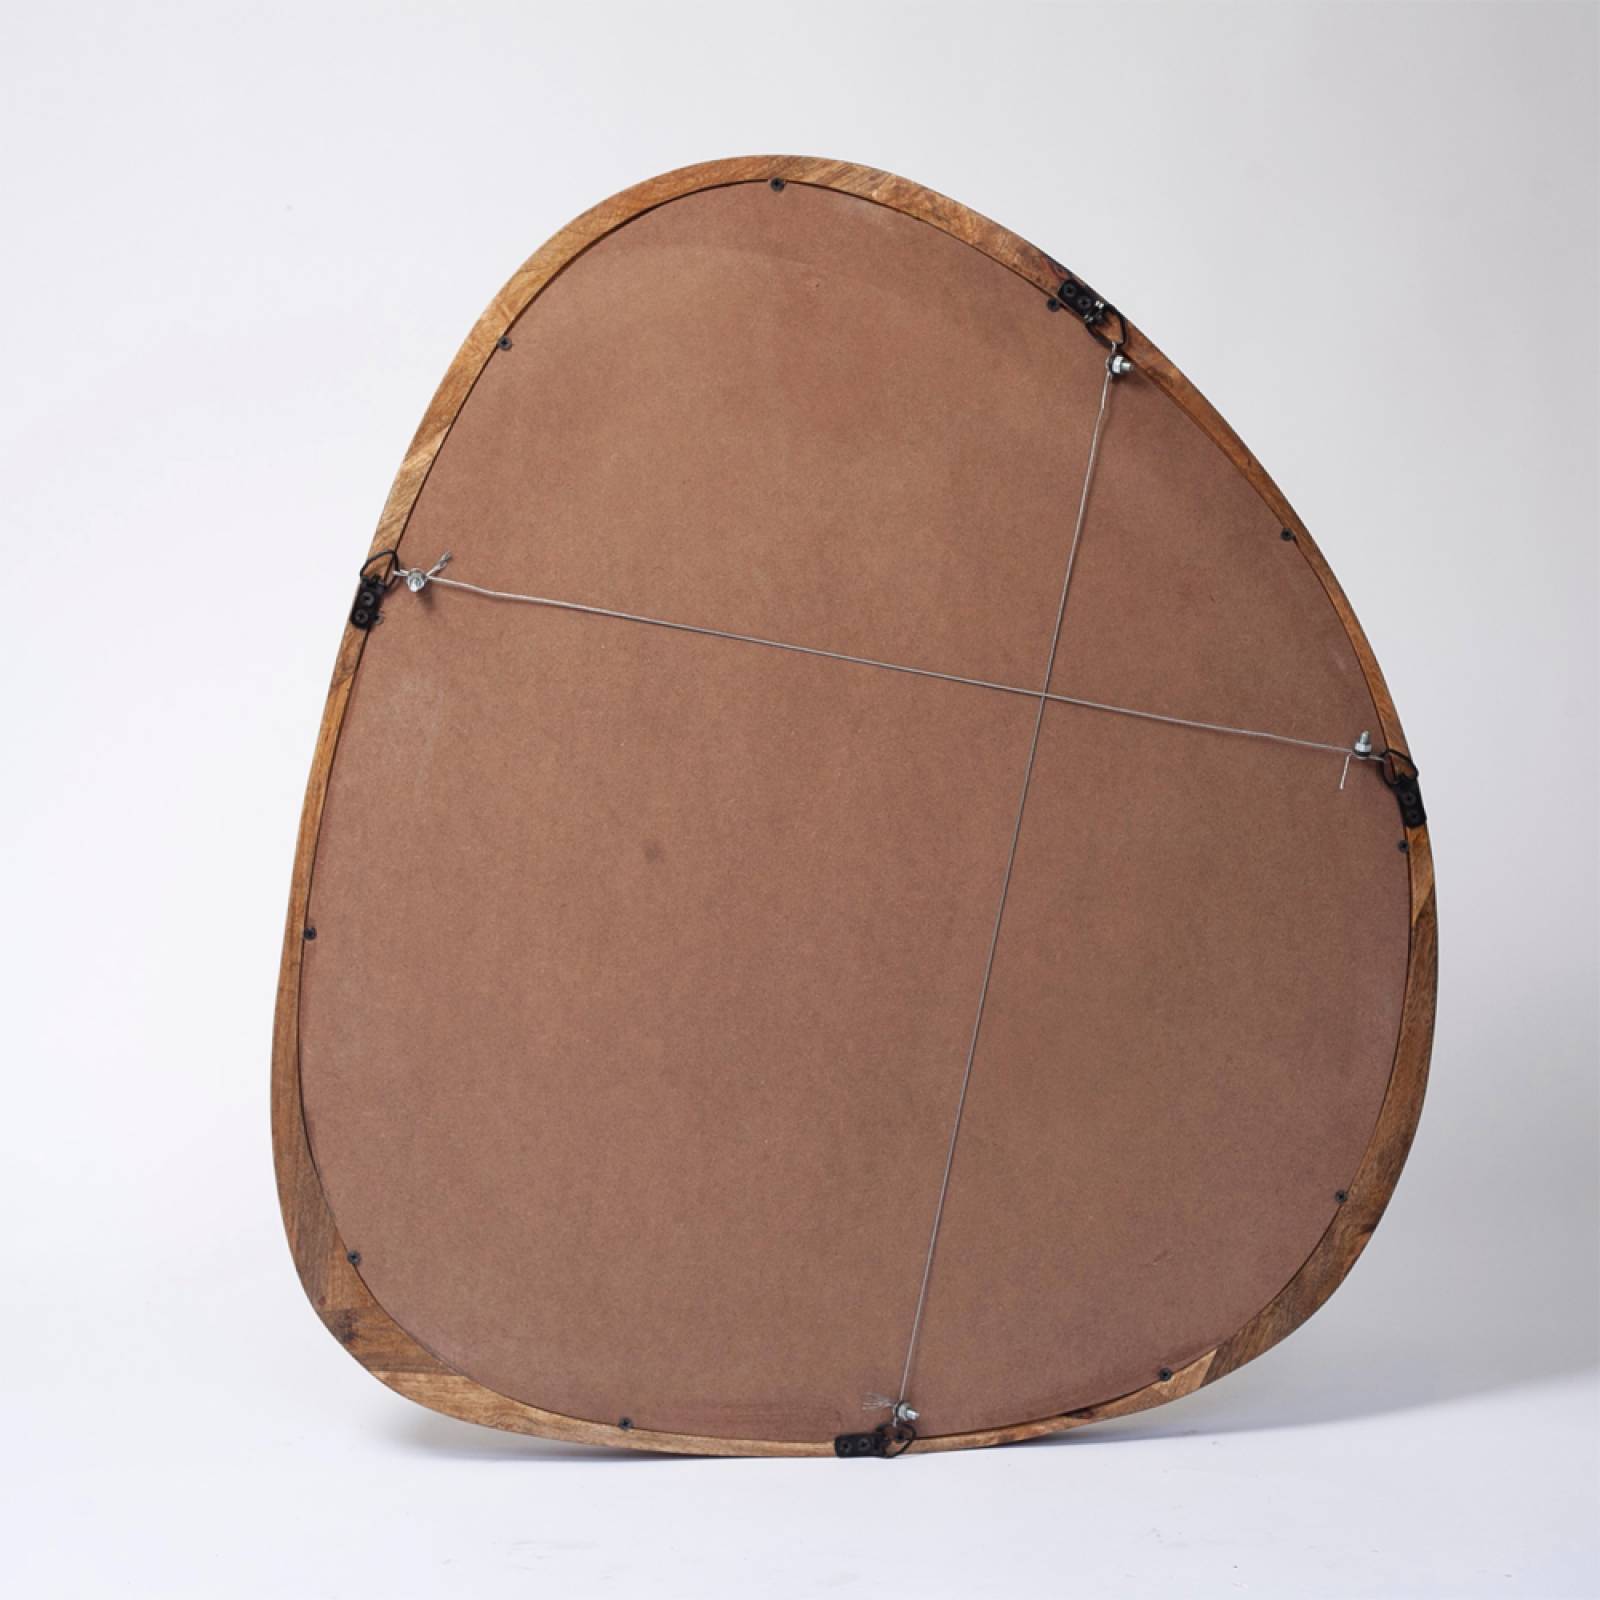 Small Organic Shaped Mirror With Wooden Back thumbnails